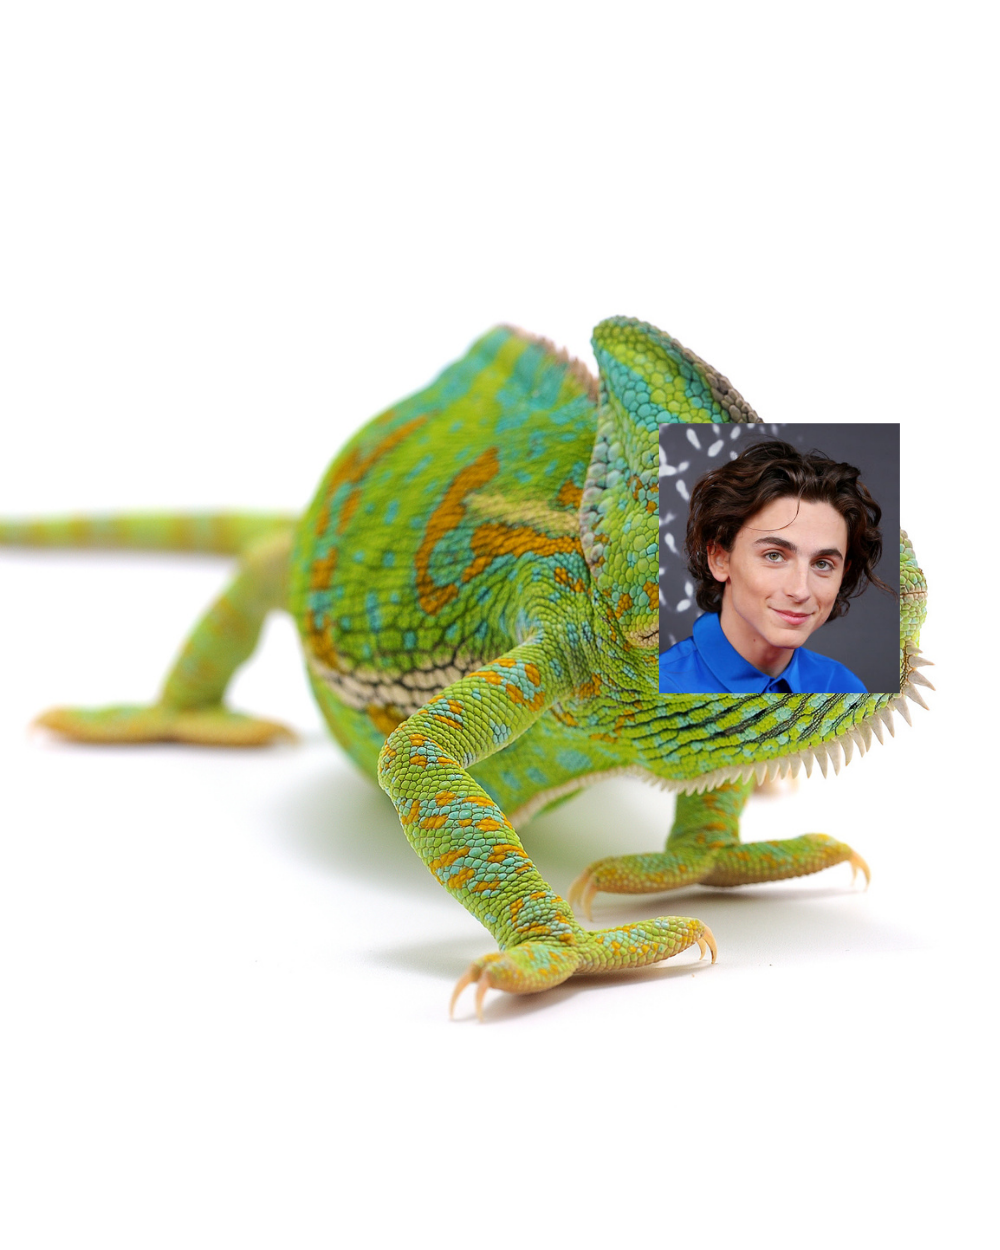 A chameleon with a photo of Timmy&#x27;s face put over the chameleon&#x27;s face